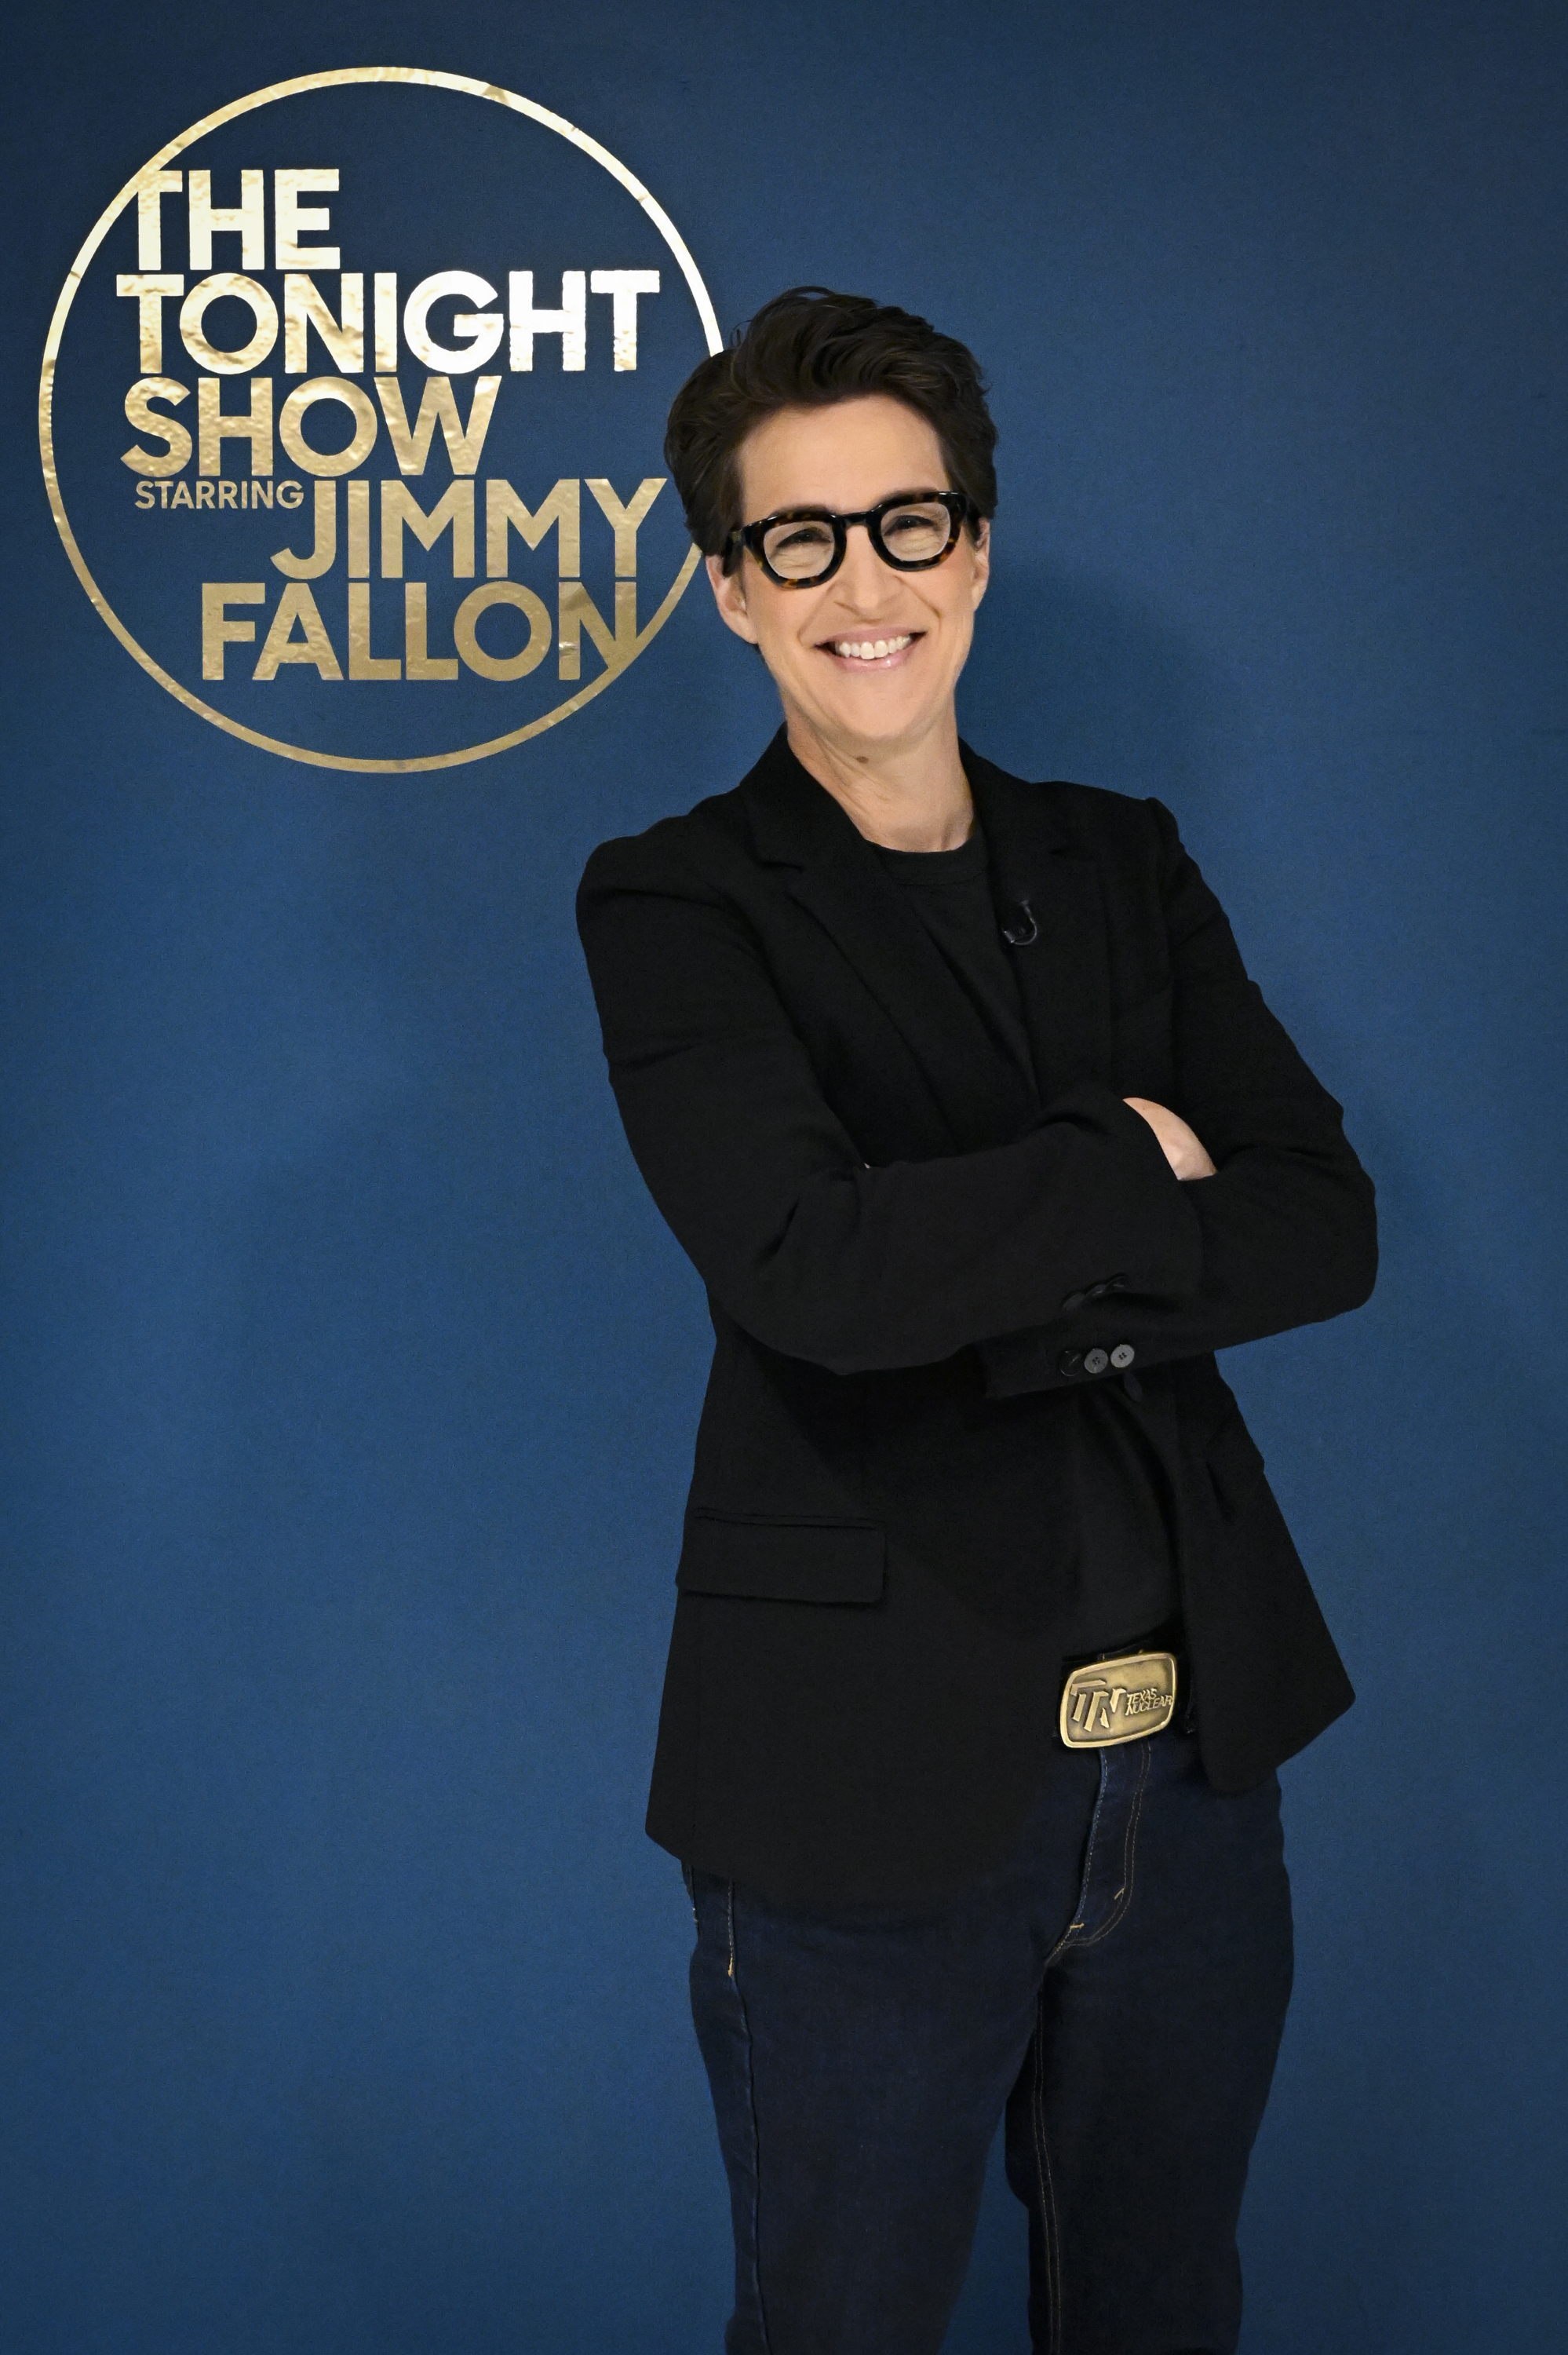 Rachel Maddow backstage at "The Tonight Show Starring Jimmy Fallon" on October 10, 2022 | Source: Getty Images